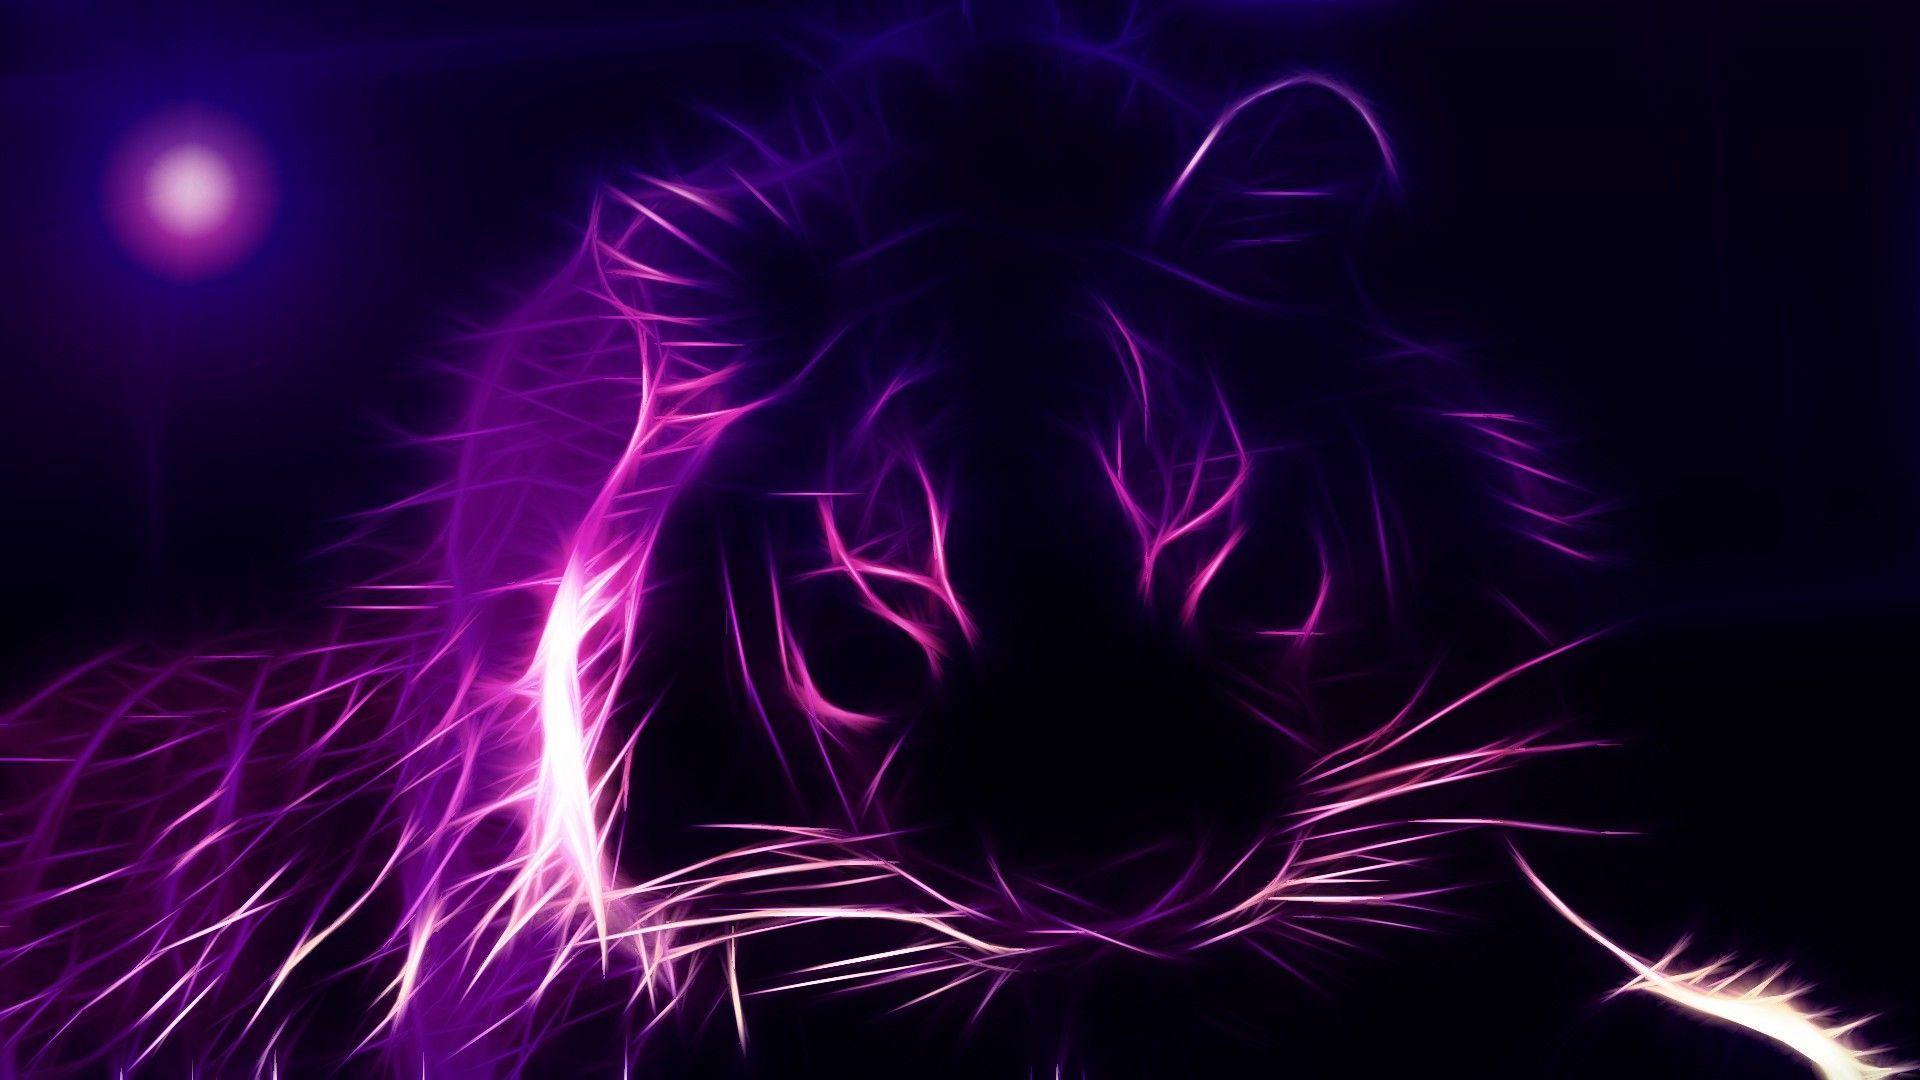 High Definition Purple Wallpaper Image for Free Download